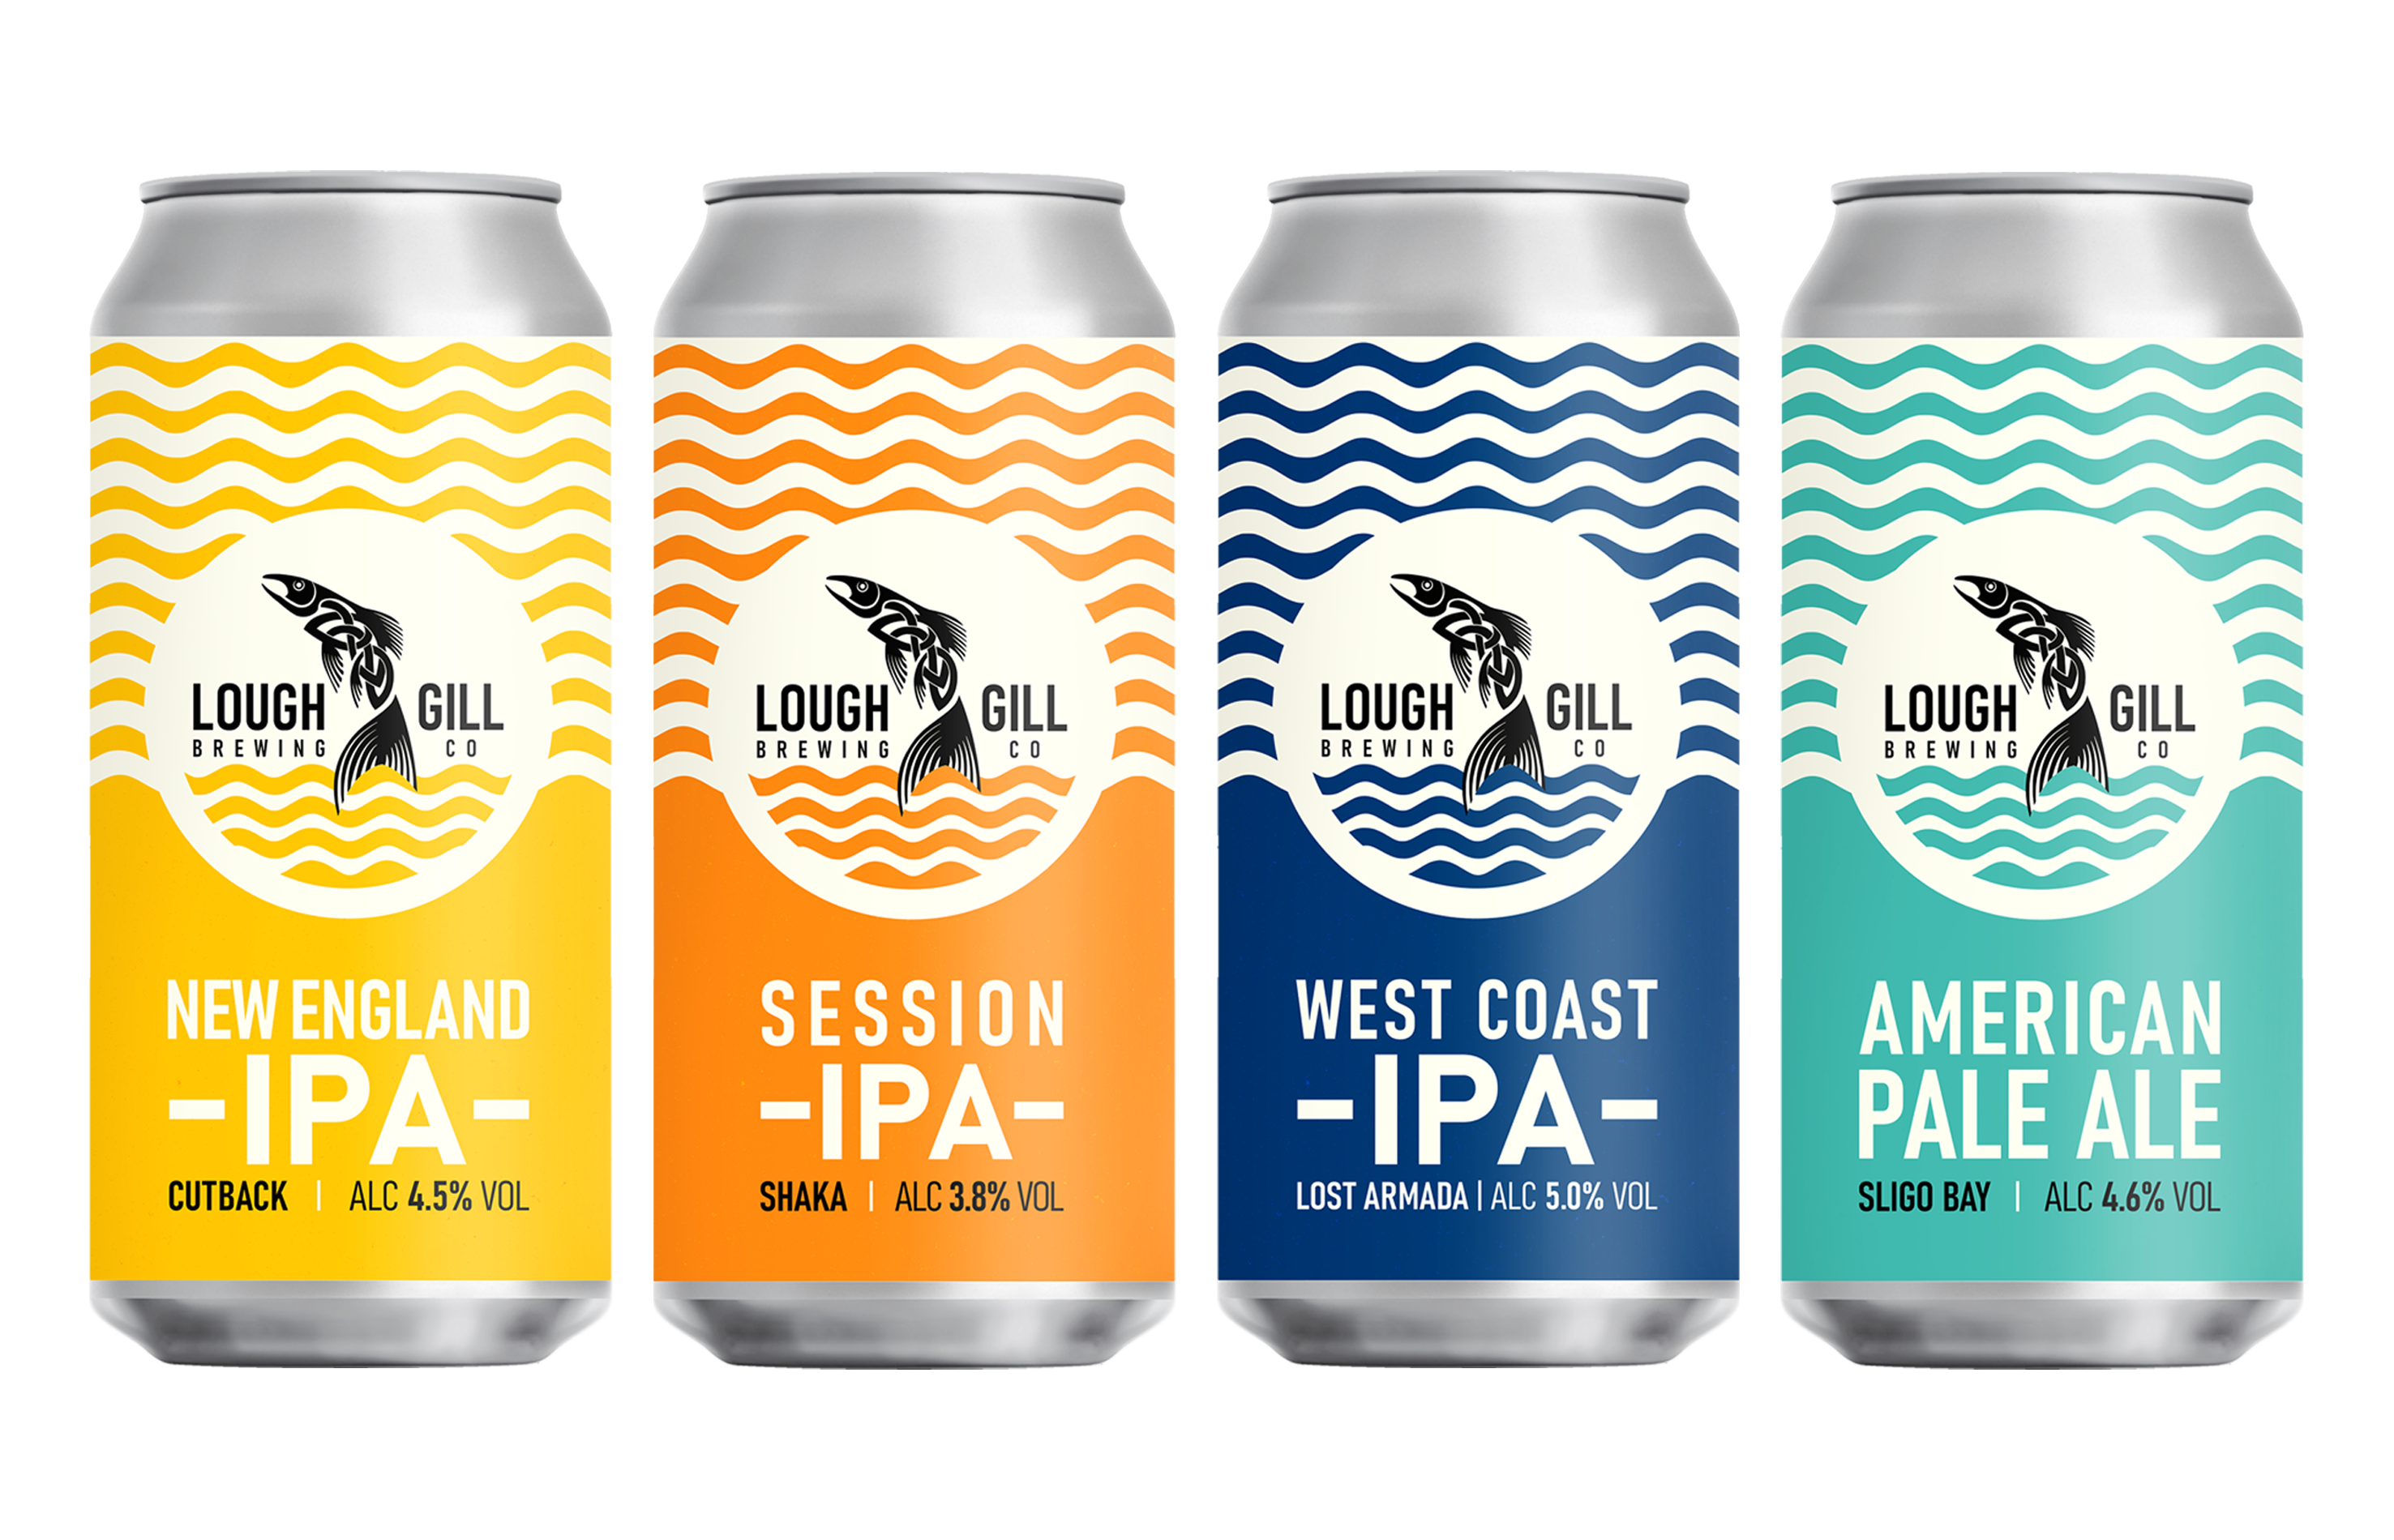 neipa 440ml can session ipa 440ml can west coast ipa 440ml can american pale ale 440ml can